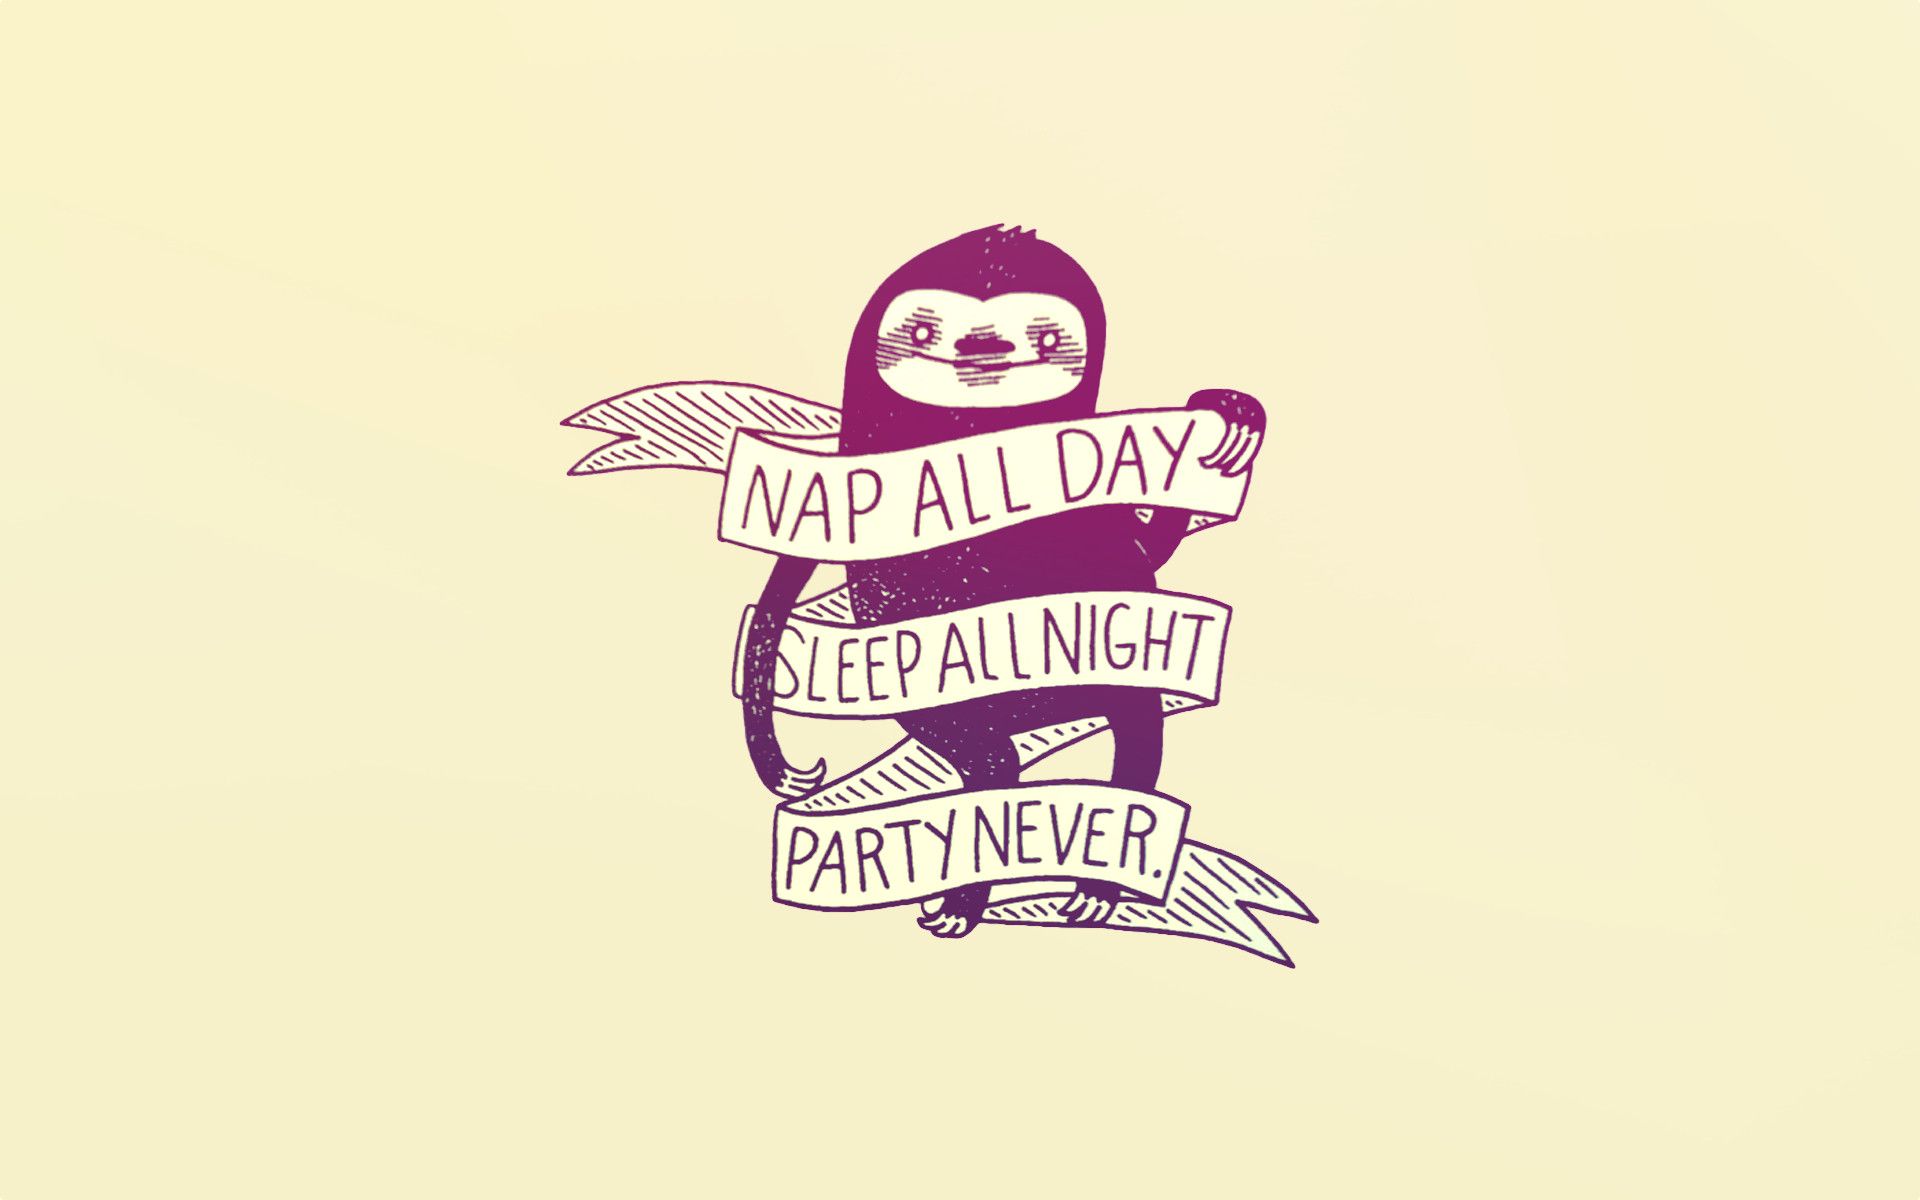 Made a wallpaper out of Nap all day sloth